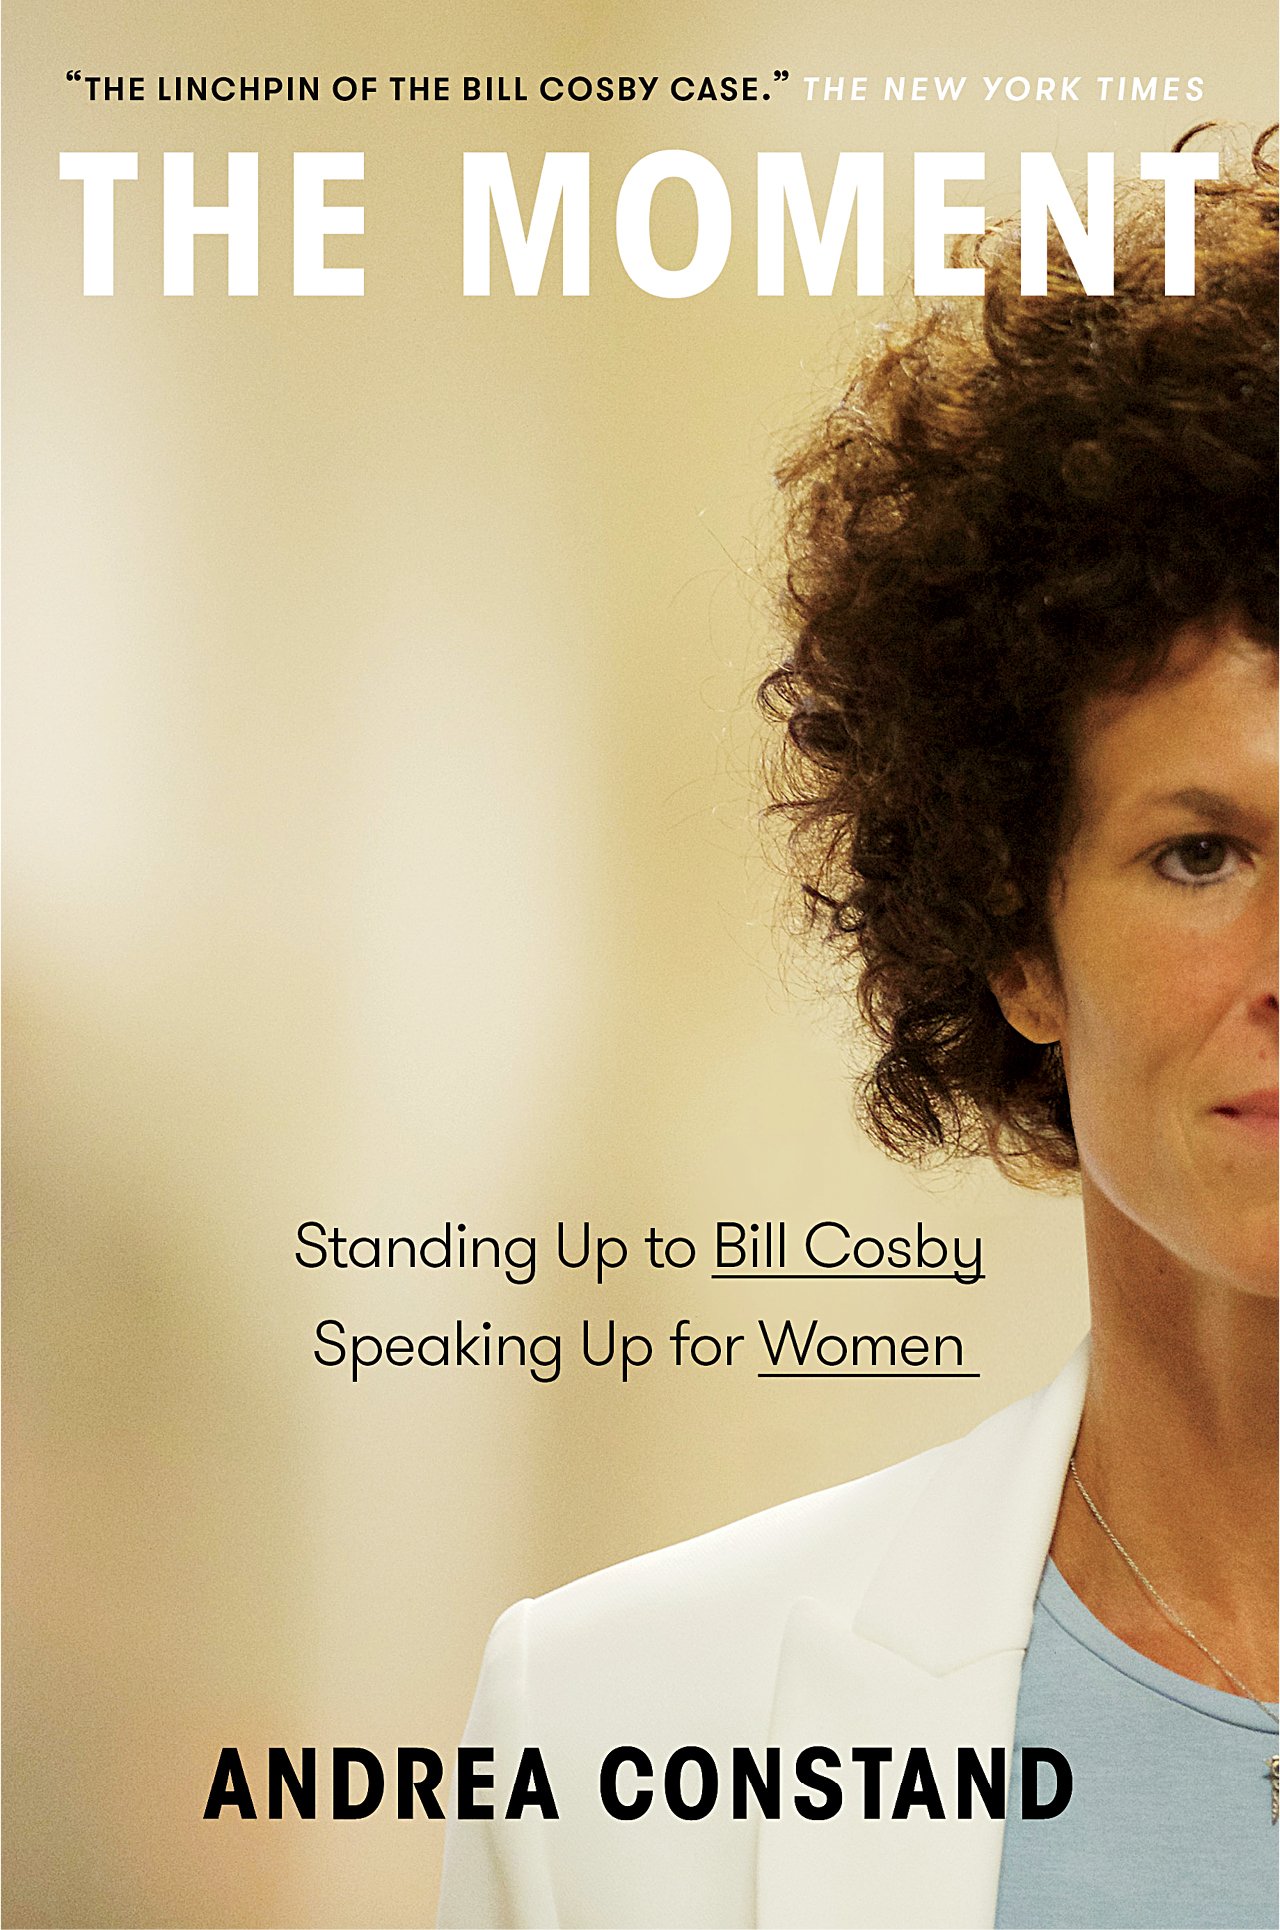 The cover of Andrea Constand's memoir, The Moment